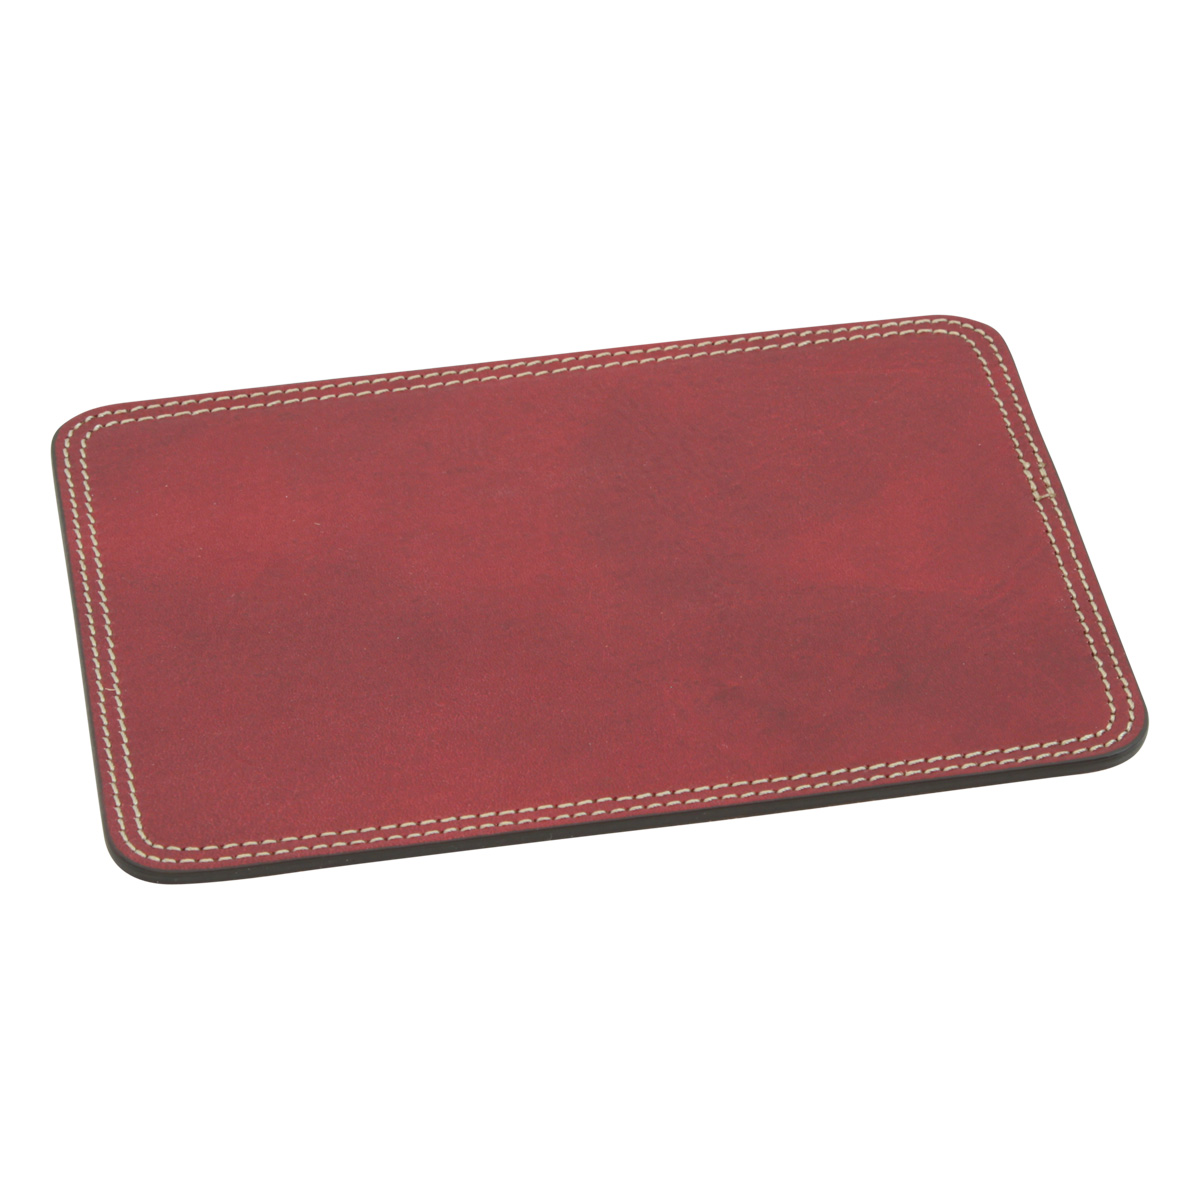 Leather mouse pad - red|761089RO|Old Angler Firenze